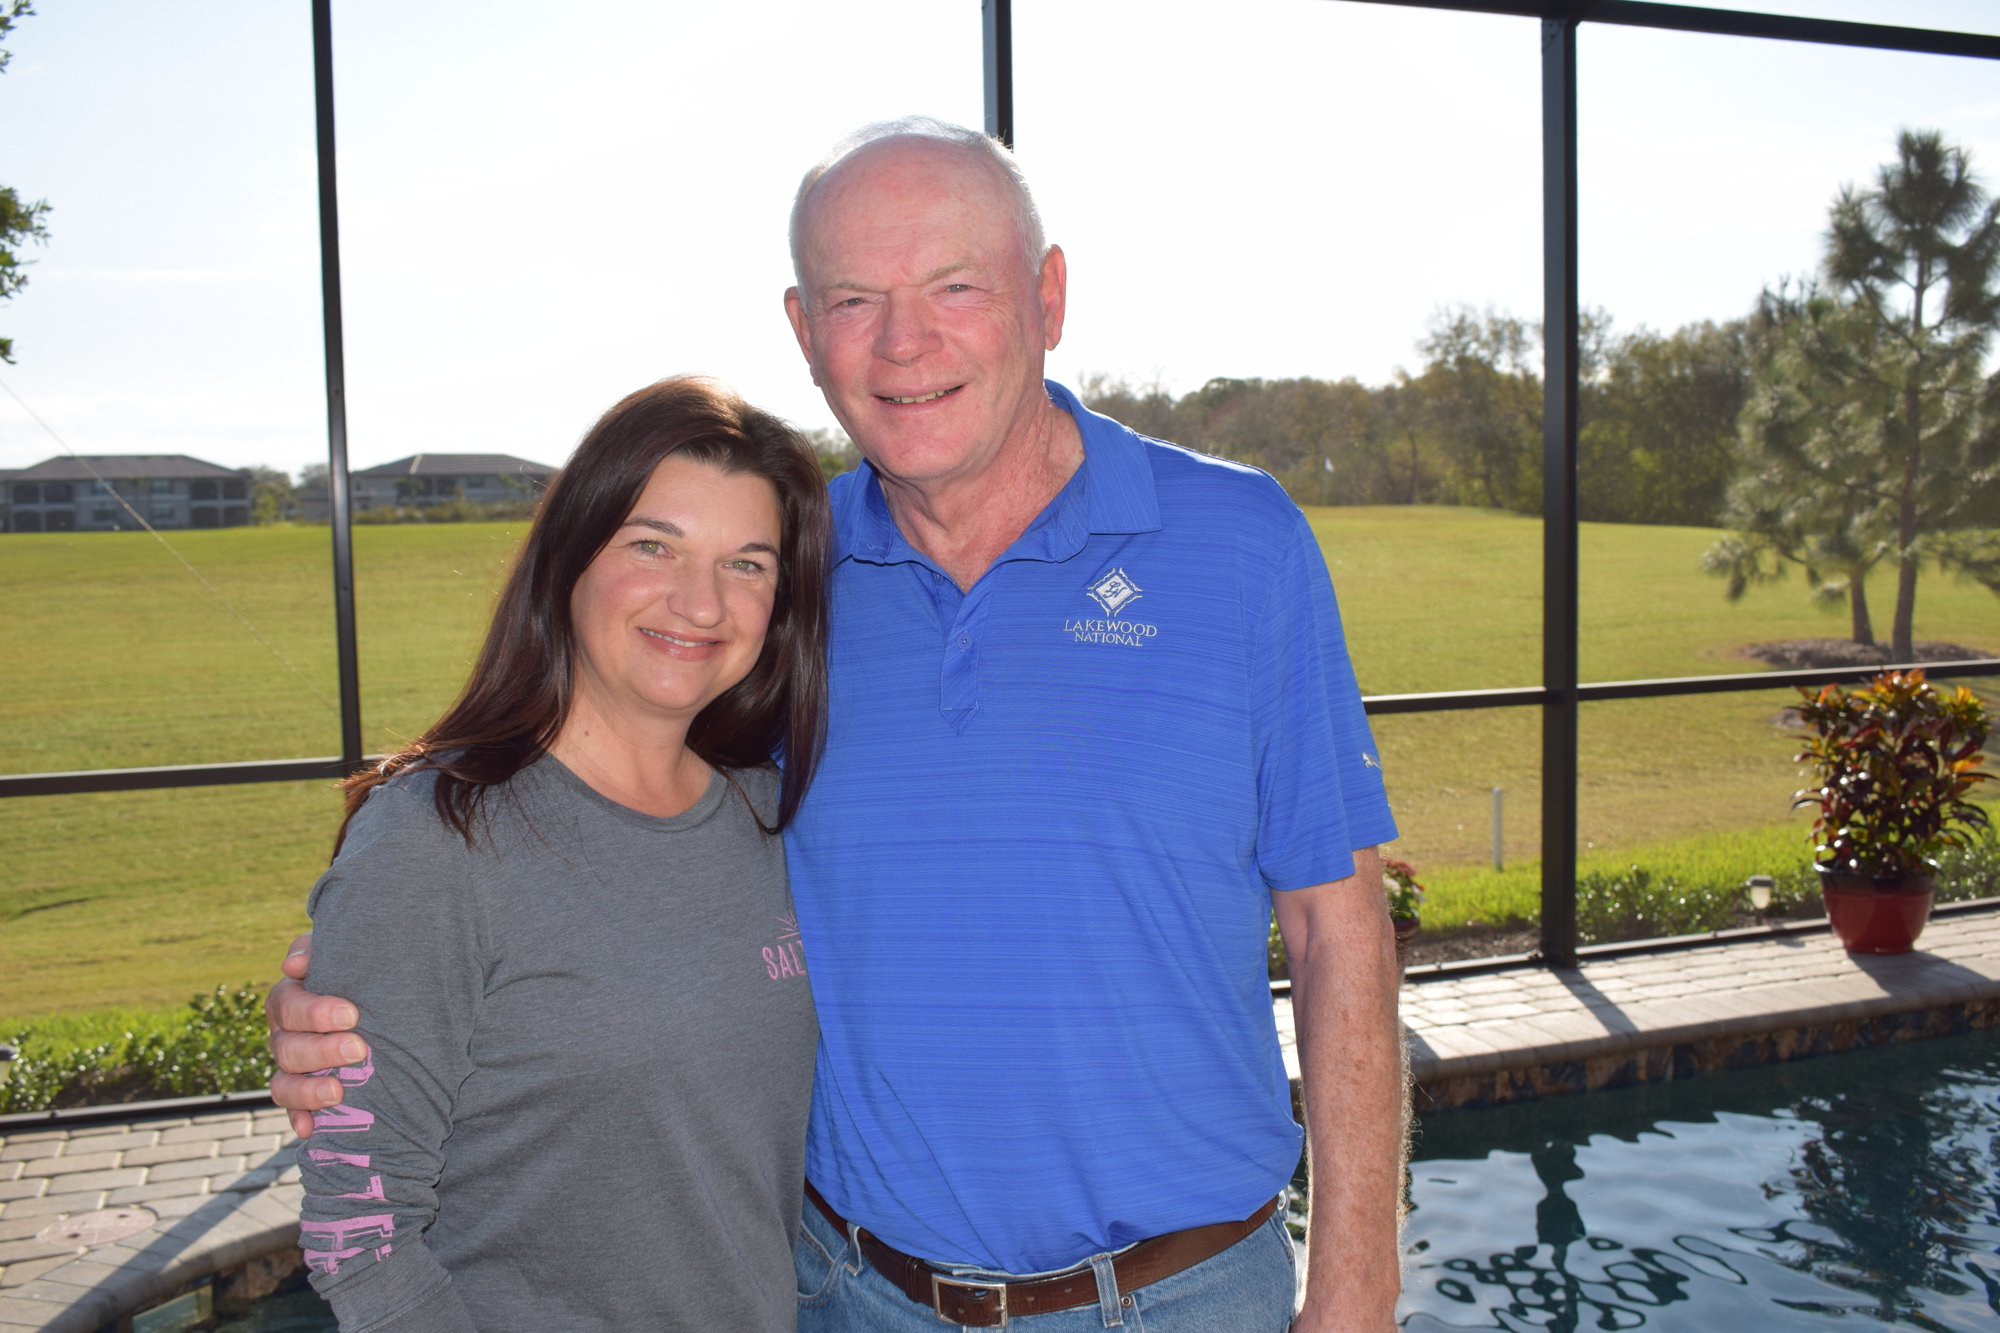 Kate and Jim Coseo said they are proud of the golf course where they live — Lakewood National.